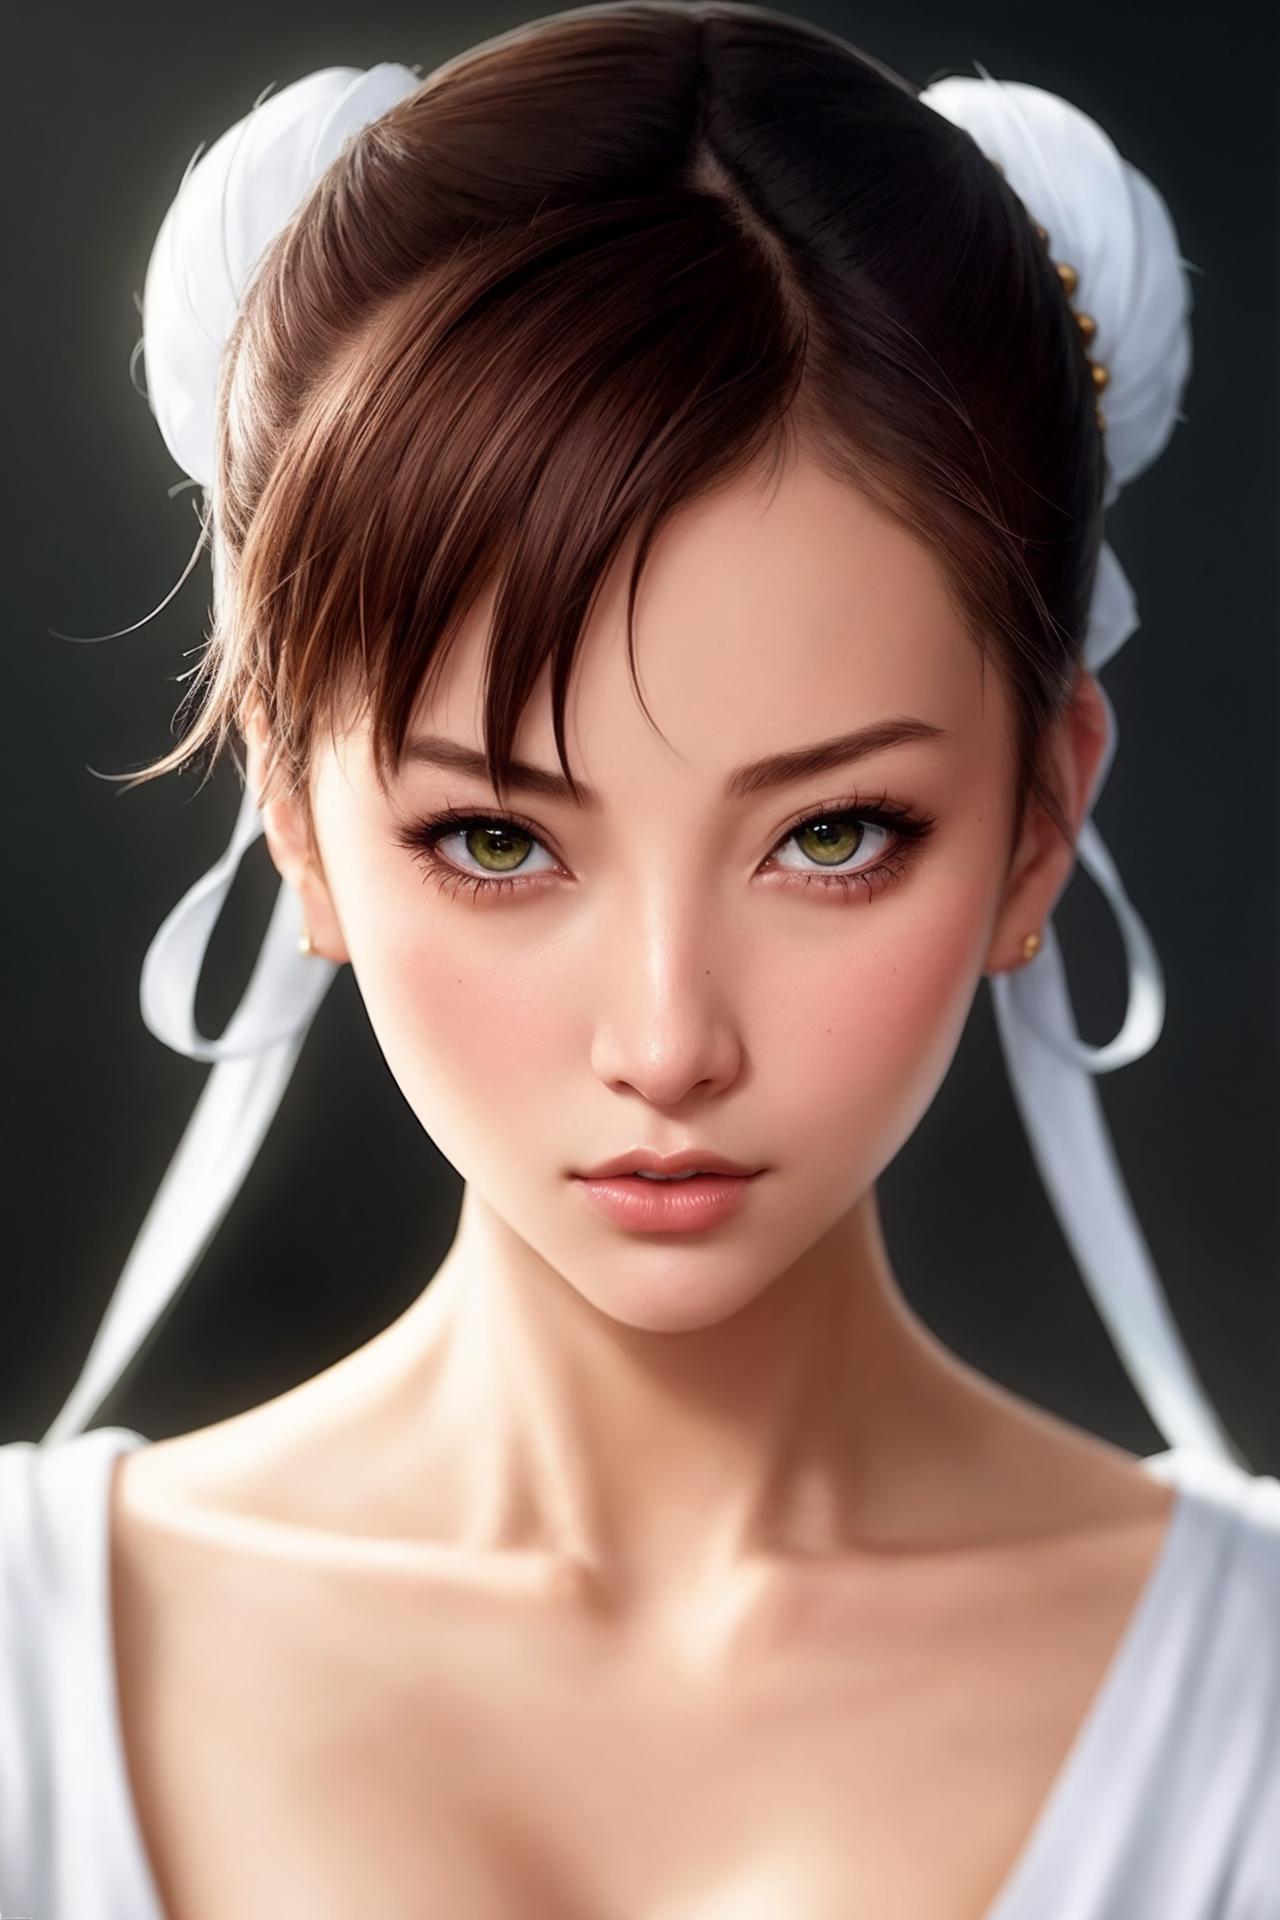 ChunLi image by mmtrs